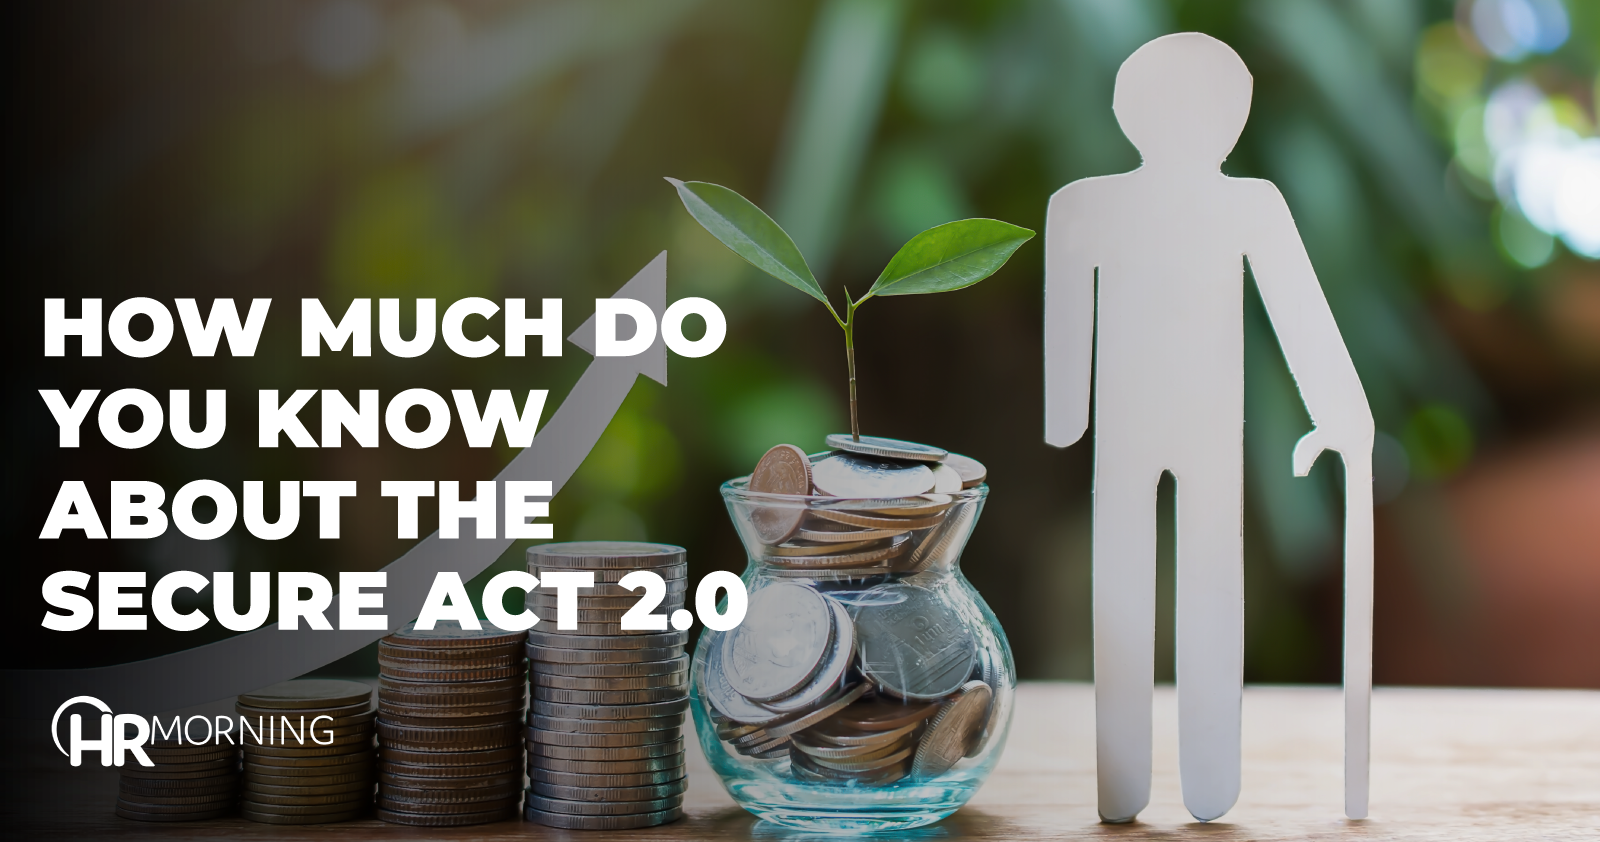 How Much Do You Know About The Secure Act 2.0